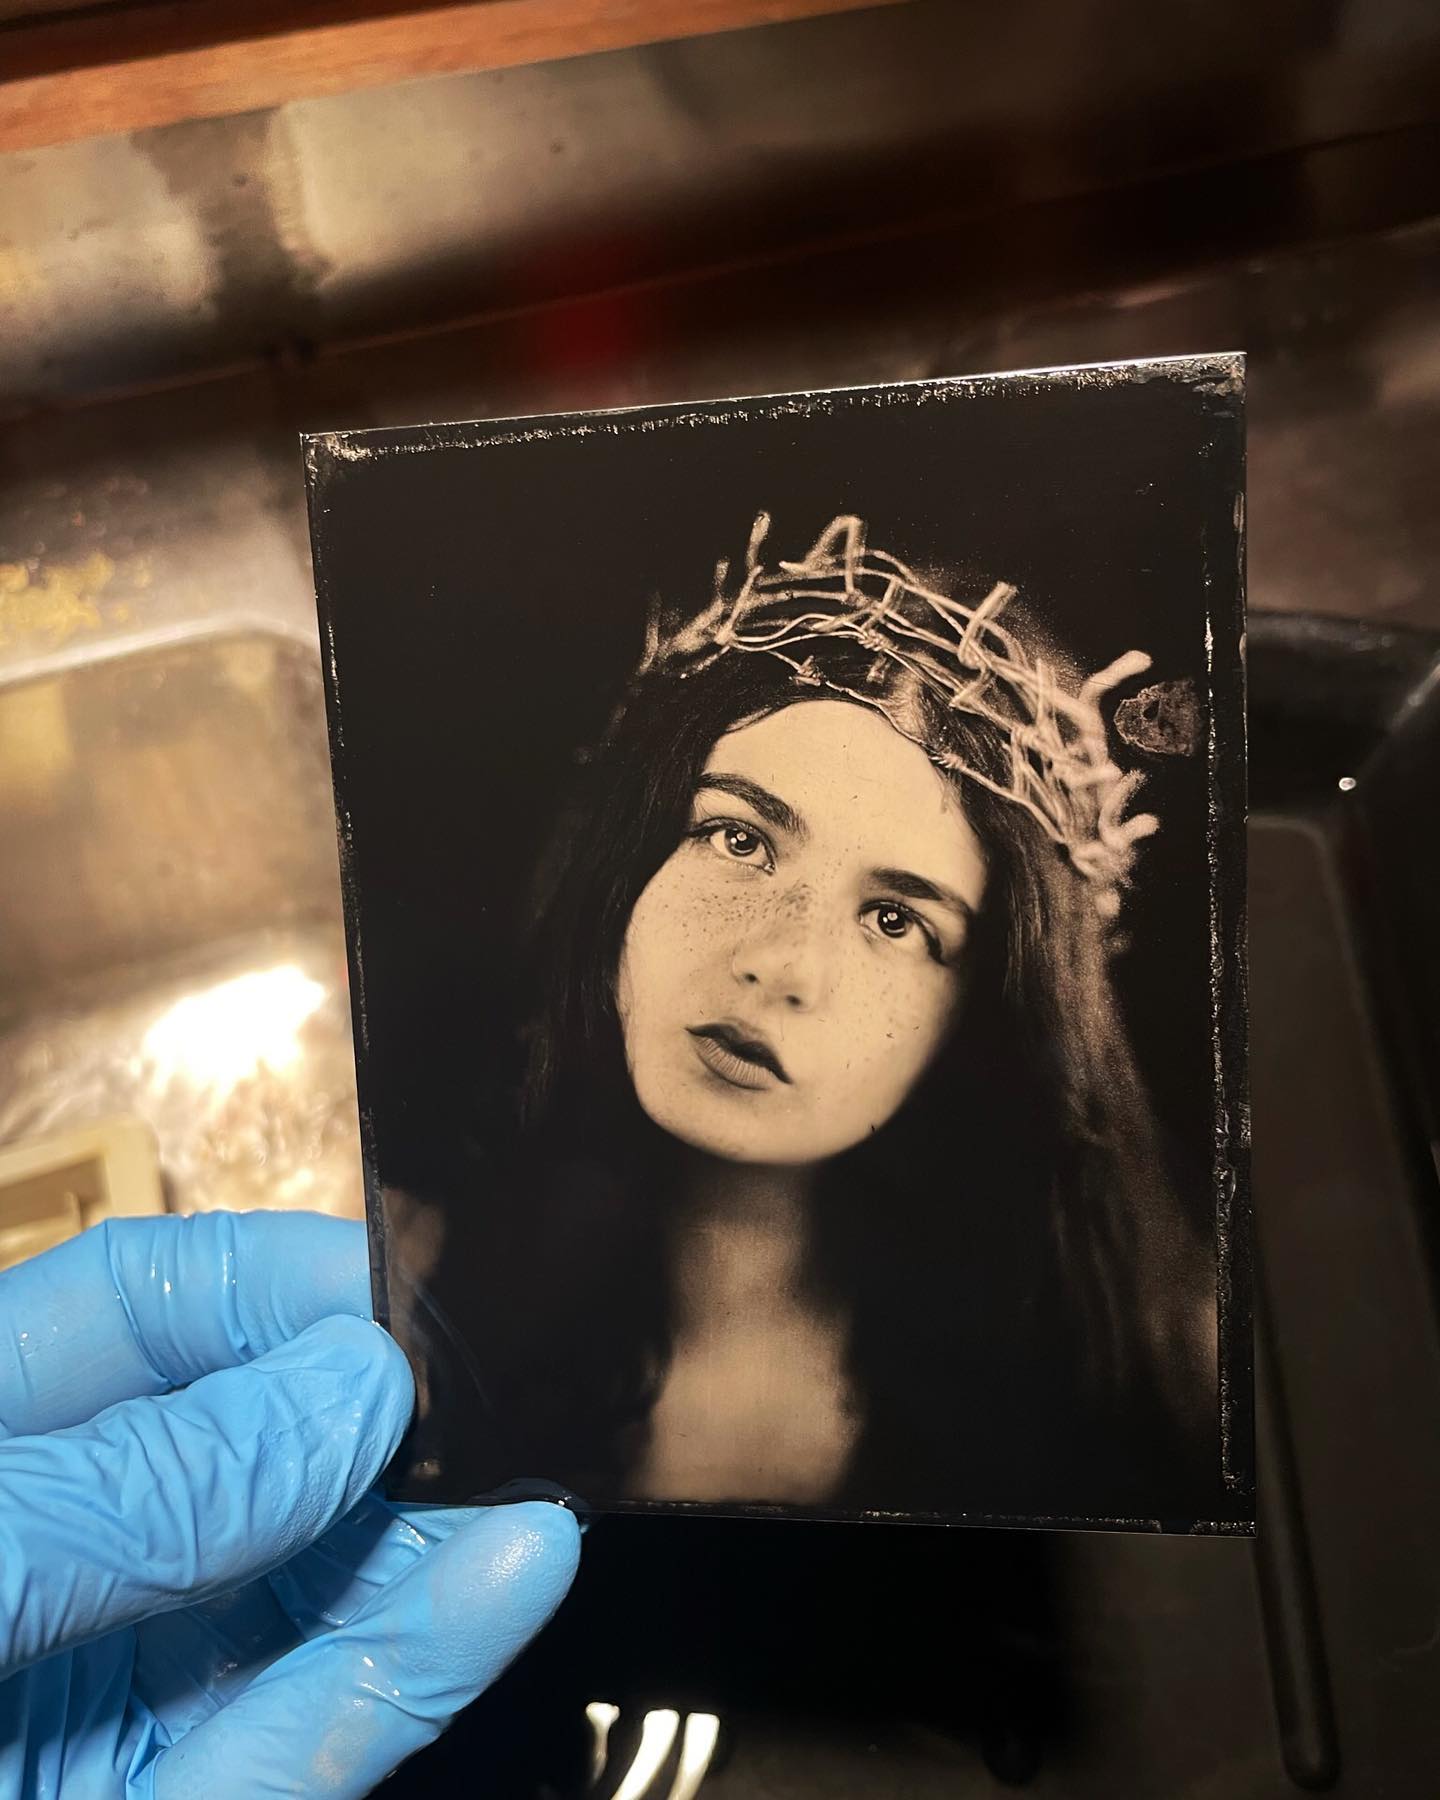 More jesus themed wet plate by the one and only @dave_shrimpton for the promo of our new single ‘Save Yourself’ (Aug 31st) 💜
Planning to get the one on 1st slide printed on some new merch.. what do u think? Shall we make some hoodies? Vests? Long sleeves? A bunch of tees again? Lemme know in the comments 💋